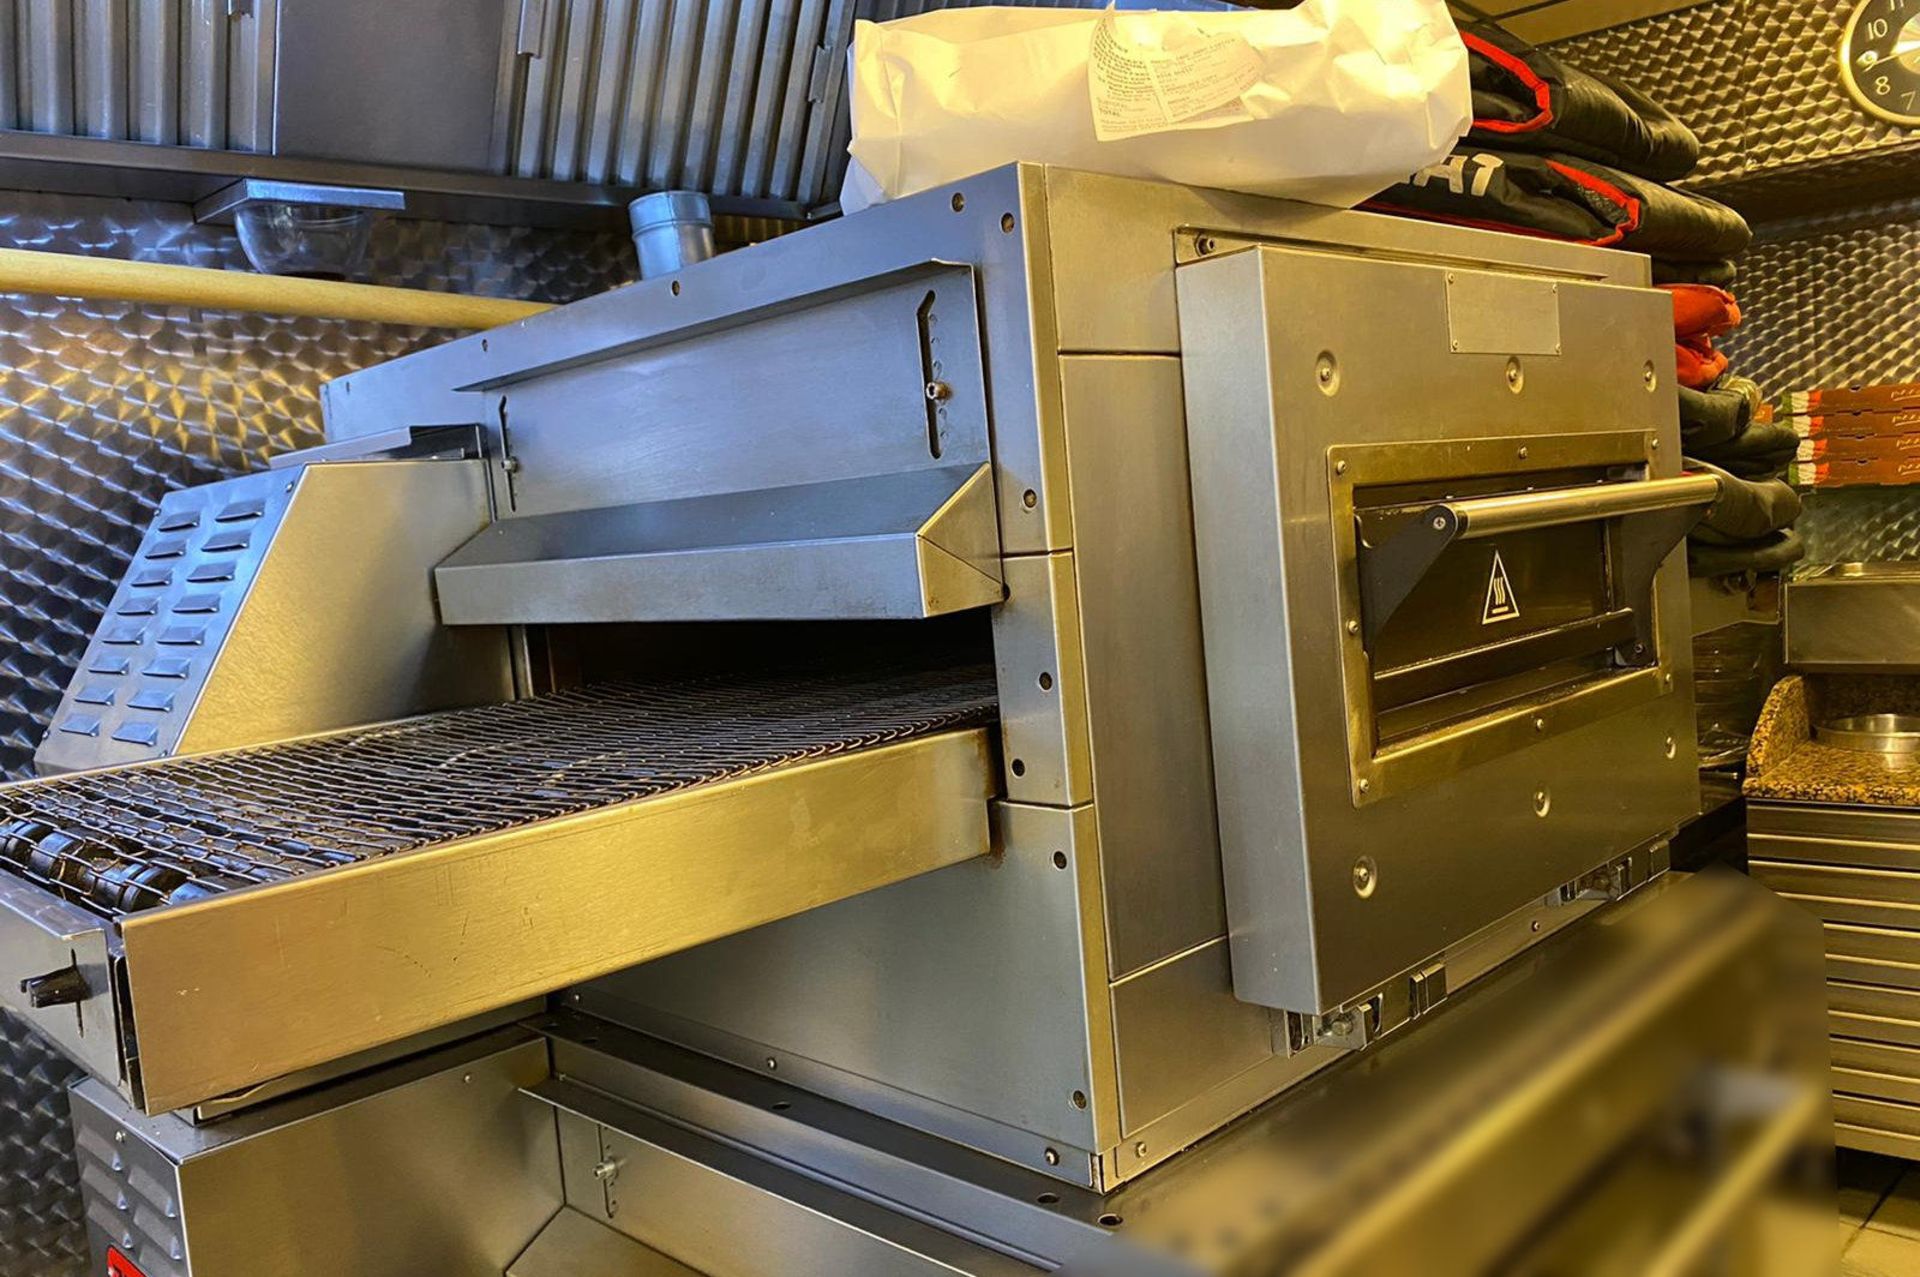 1 x Zanolli Synthesis 08/50 V Conveyor Pizza Oven - Requires repair - CL633 - Location: